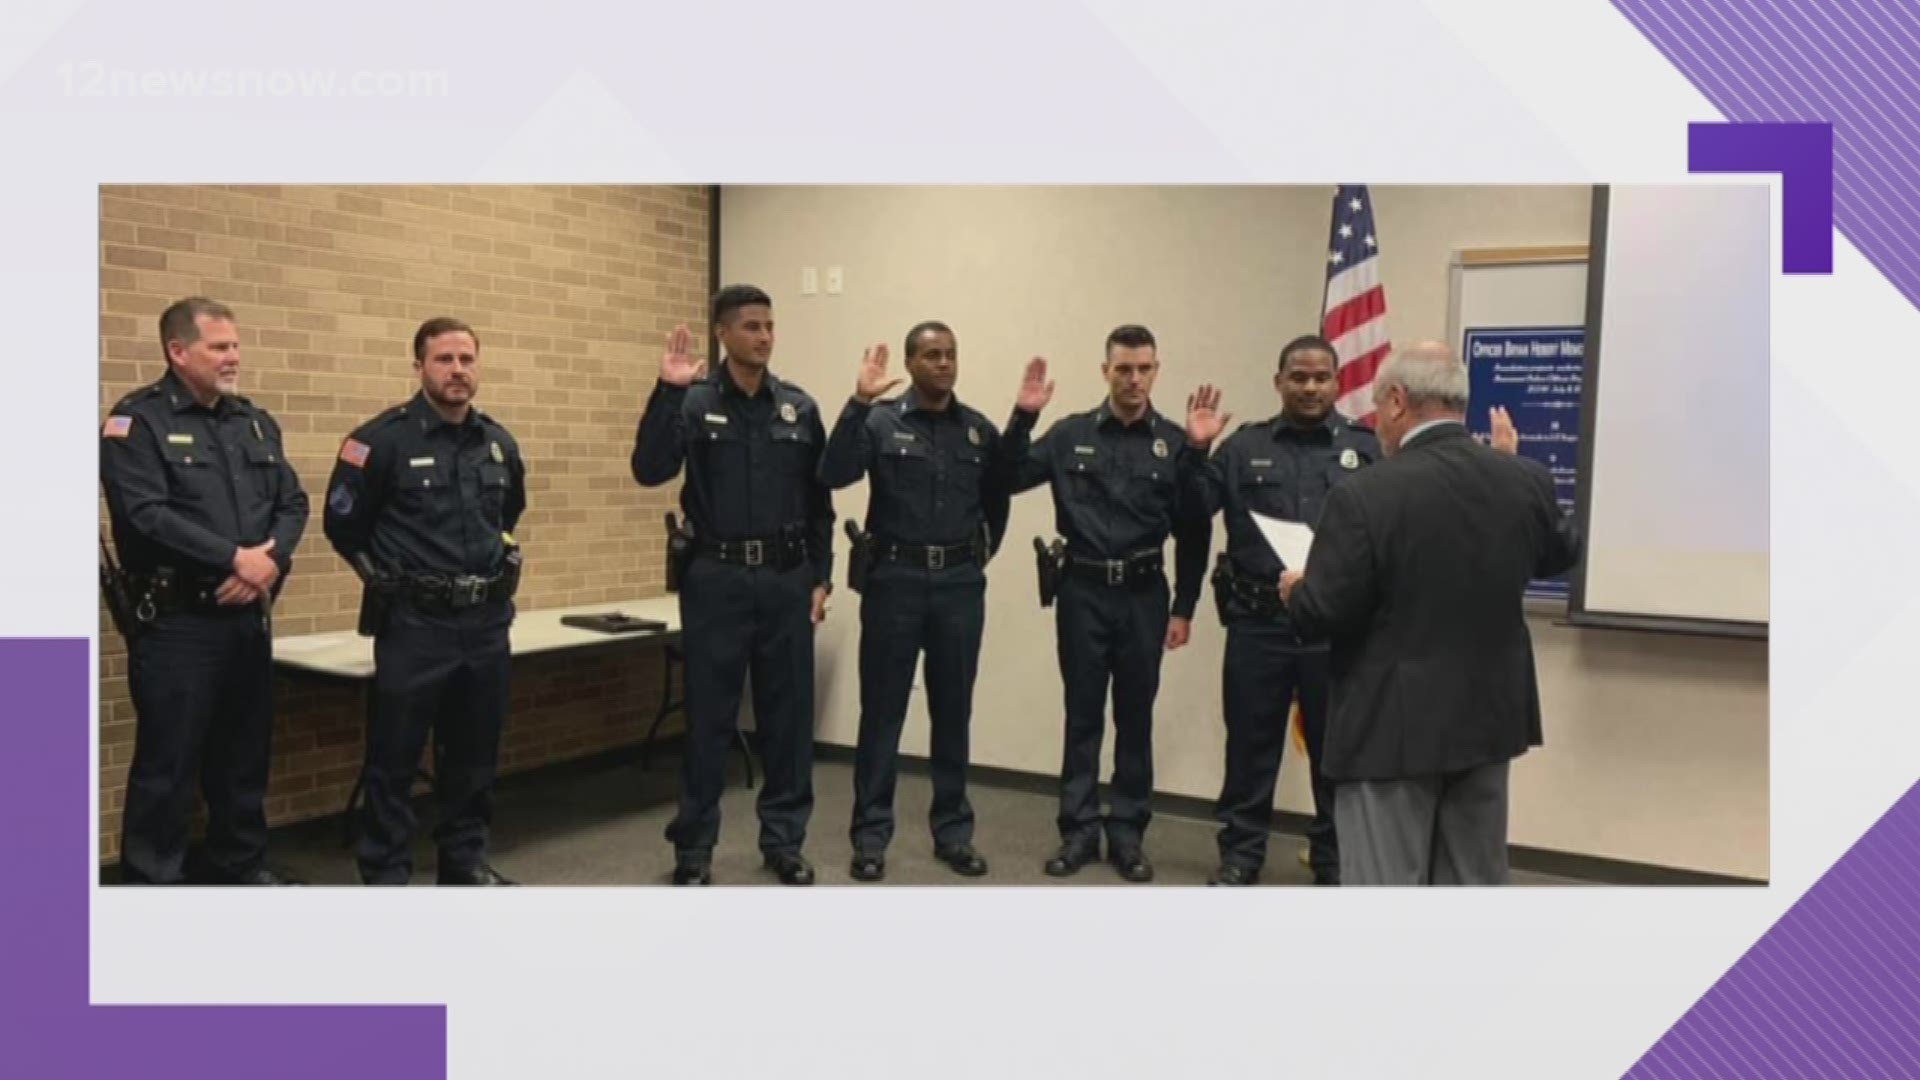 The department added four new recruits and promoted a current officer to sergeant.